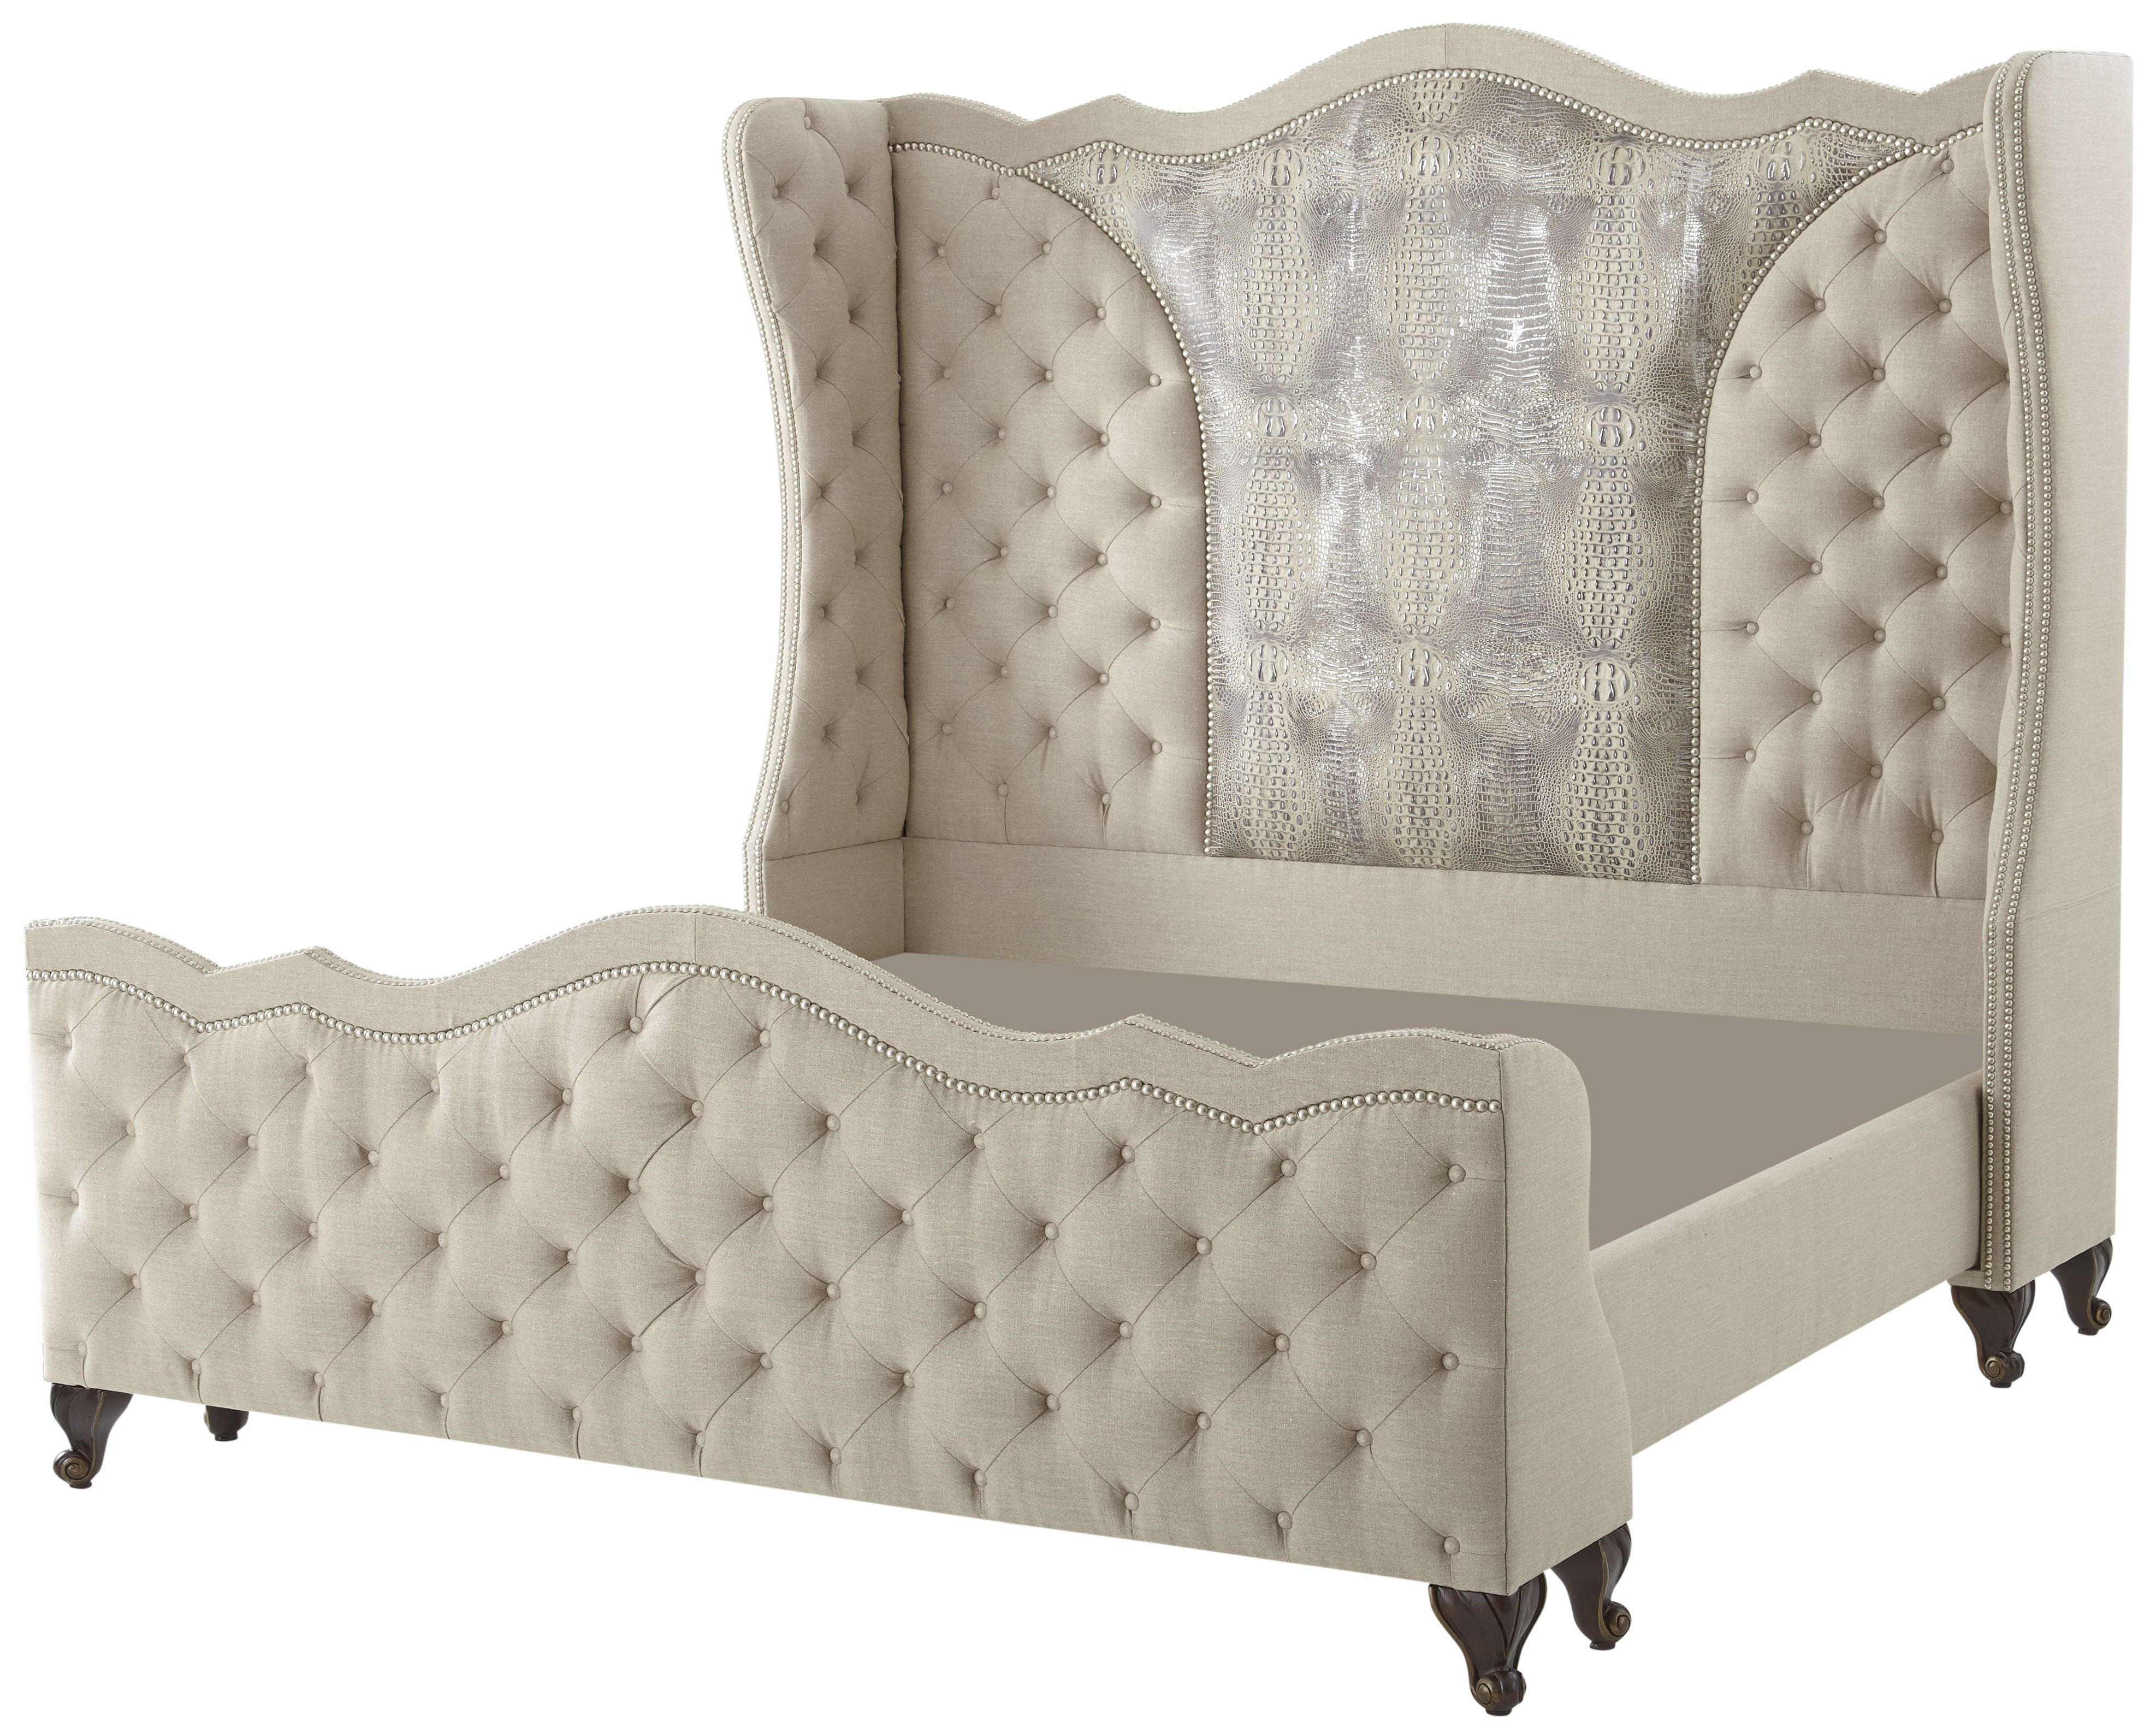 BEDS - Queen, King & California King Sizes High style bed with tufted head board and foot board with albino gator hide